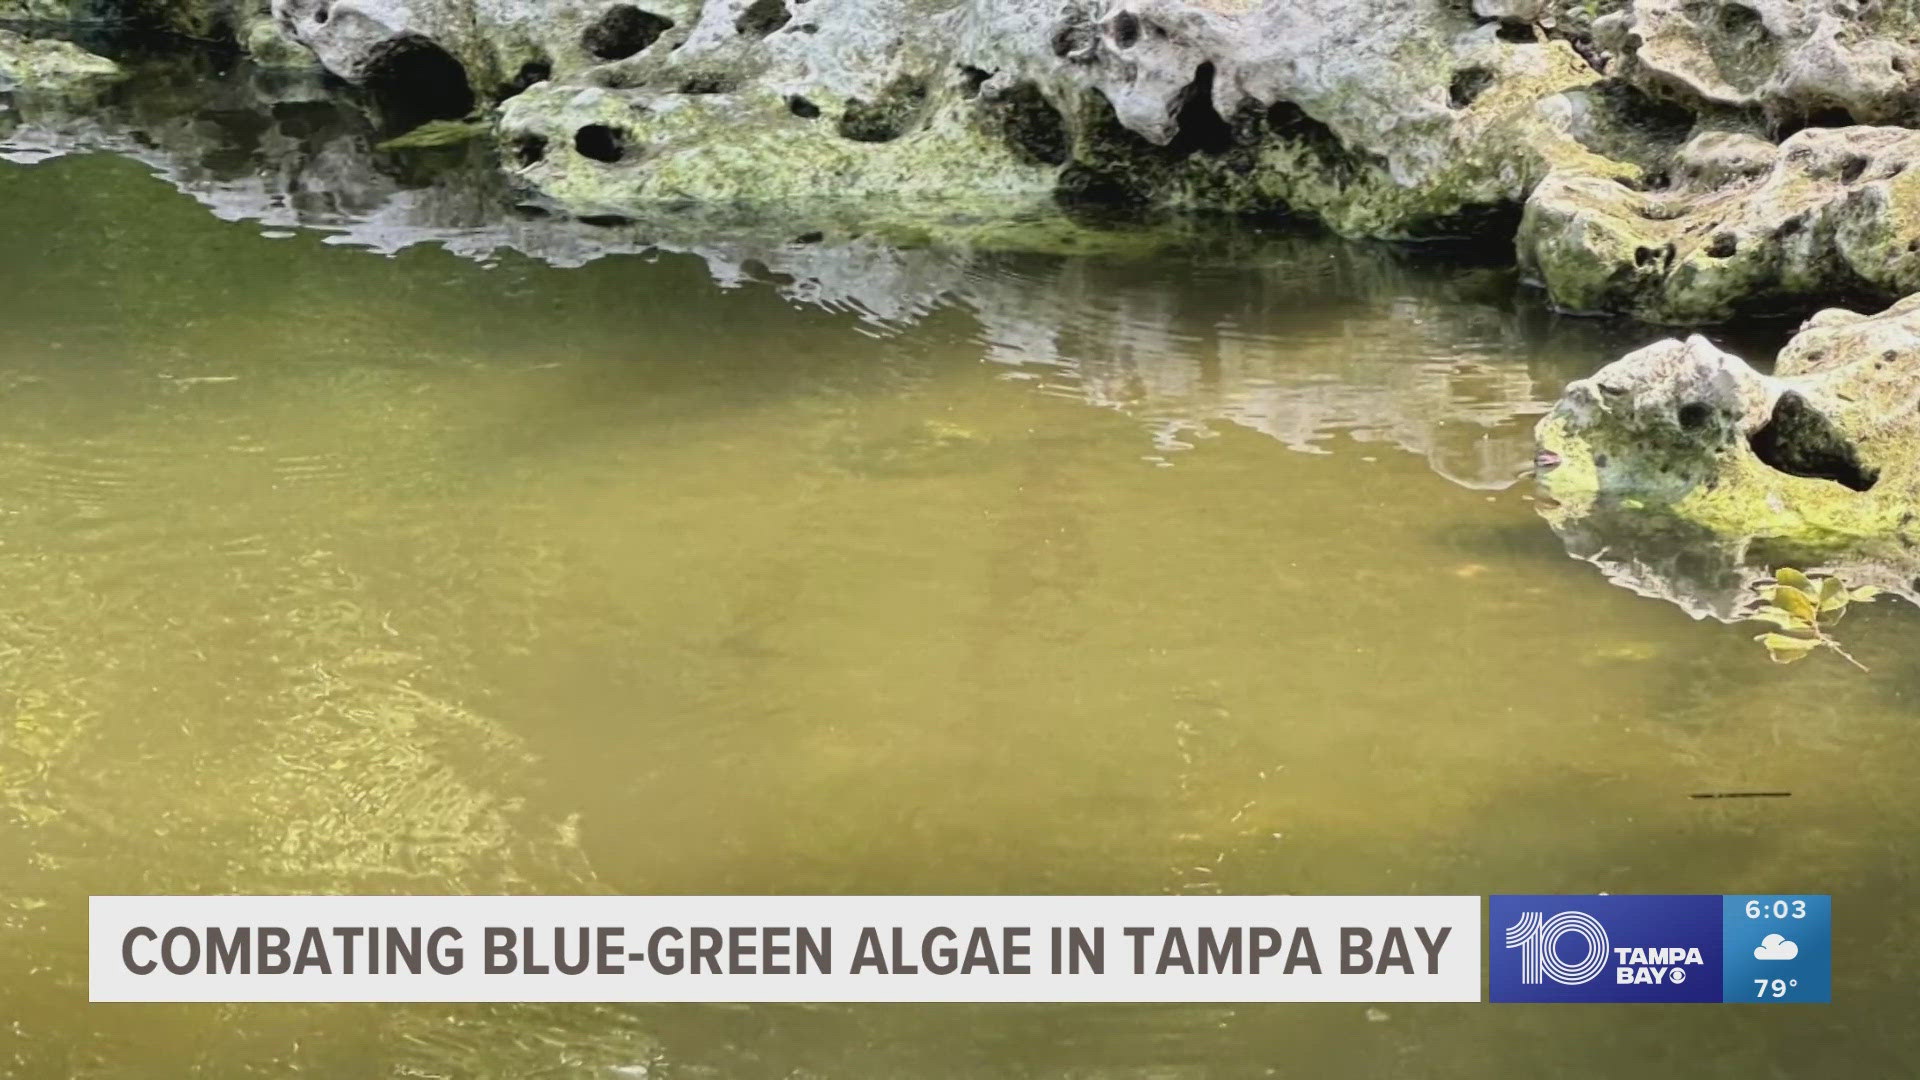 Blue-green algae blooms can be toxic to people and animals.